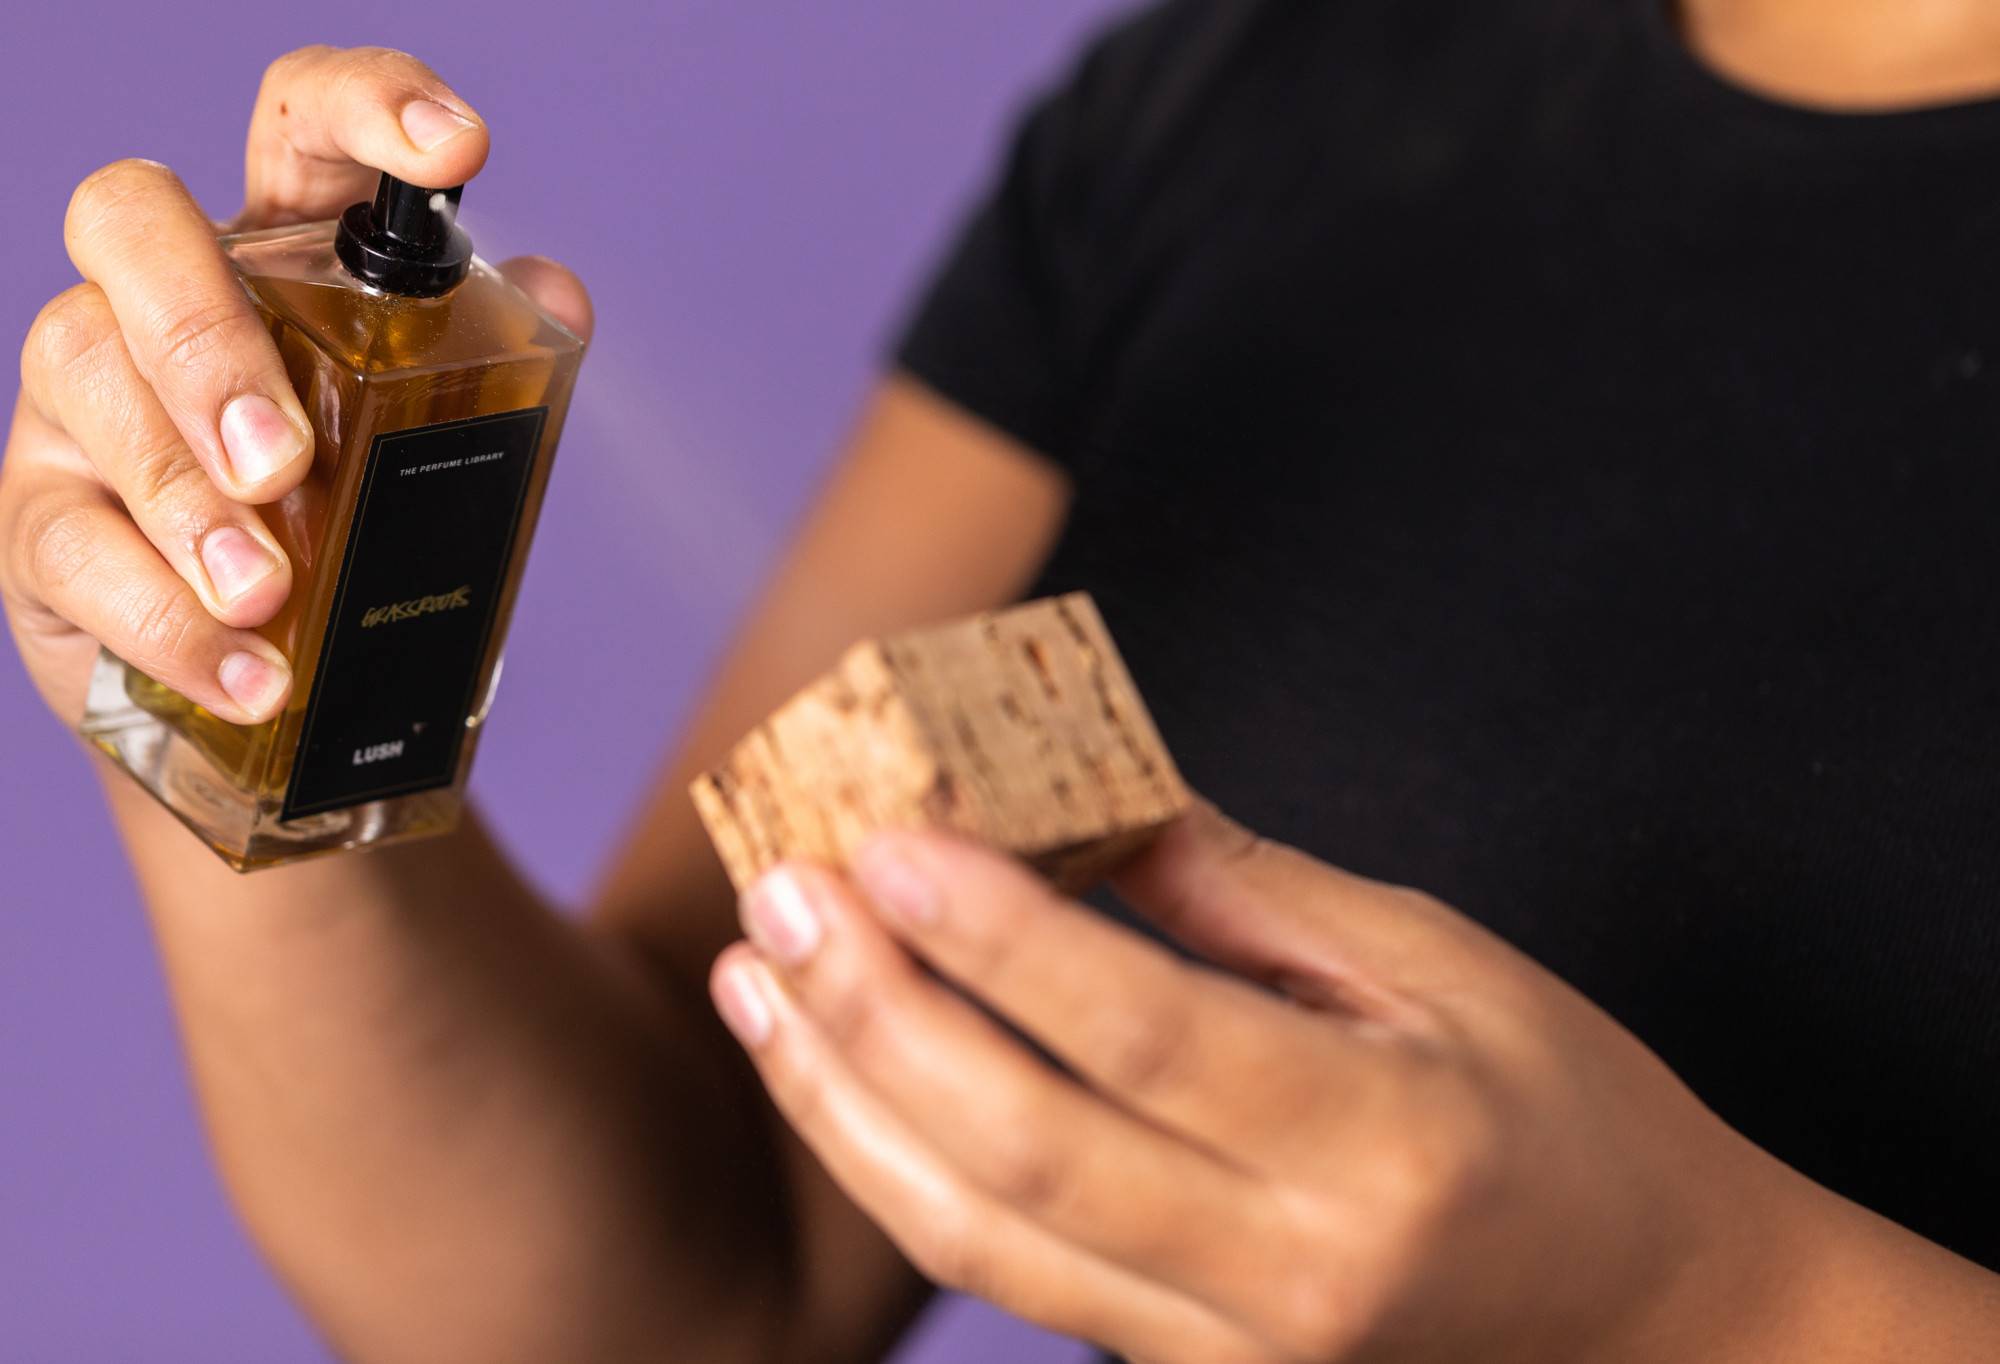 Someone spritzes a square cork lid with the black label perfume Grassroots, against a purple background.